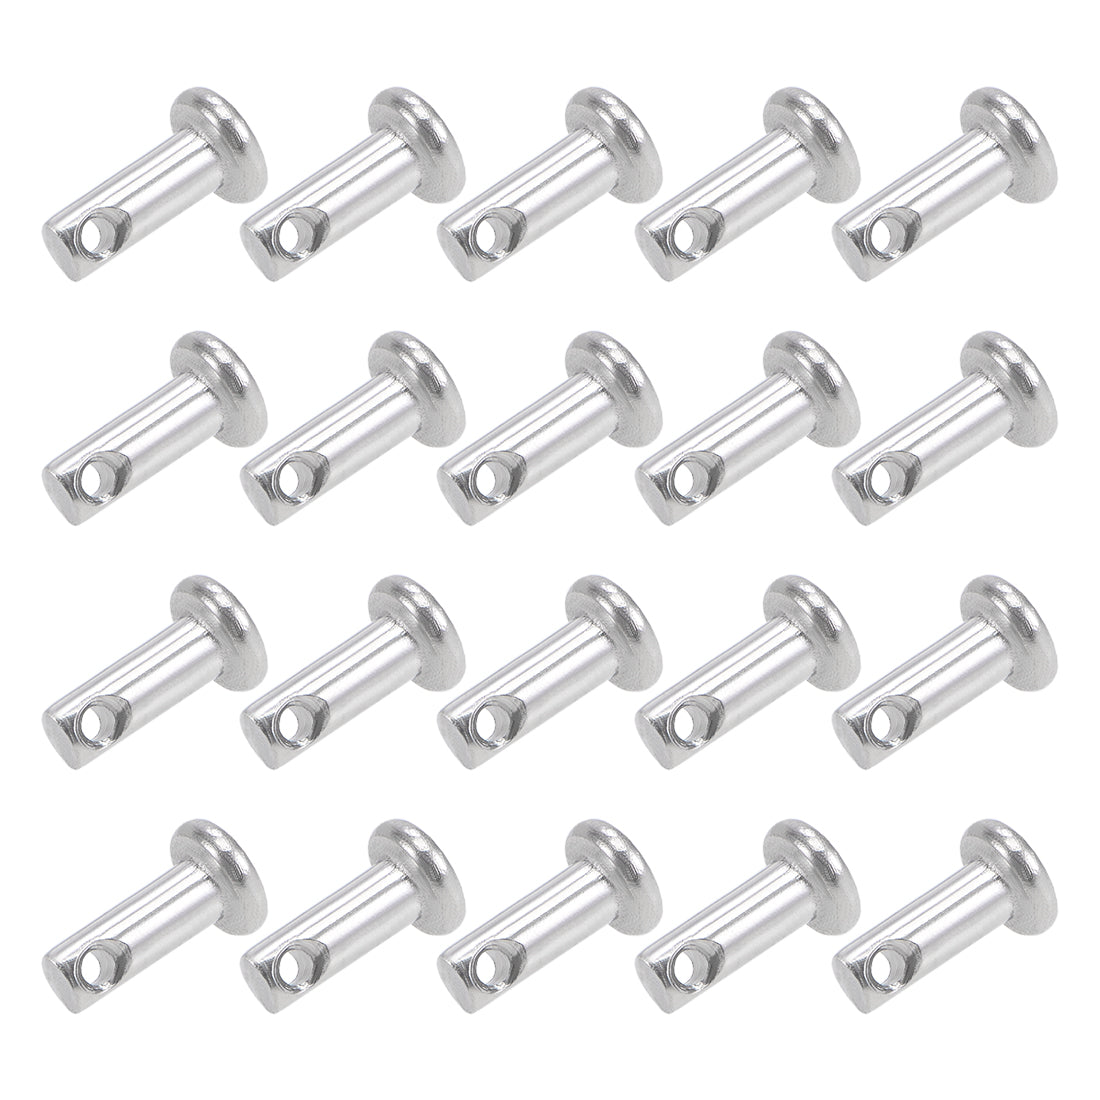 uxcell Uxcell Single Hole Clevis Pins - 3mm x 8mm Flat Head 304 Stainless Steel Link Hinge Pin 20Pcs